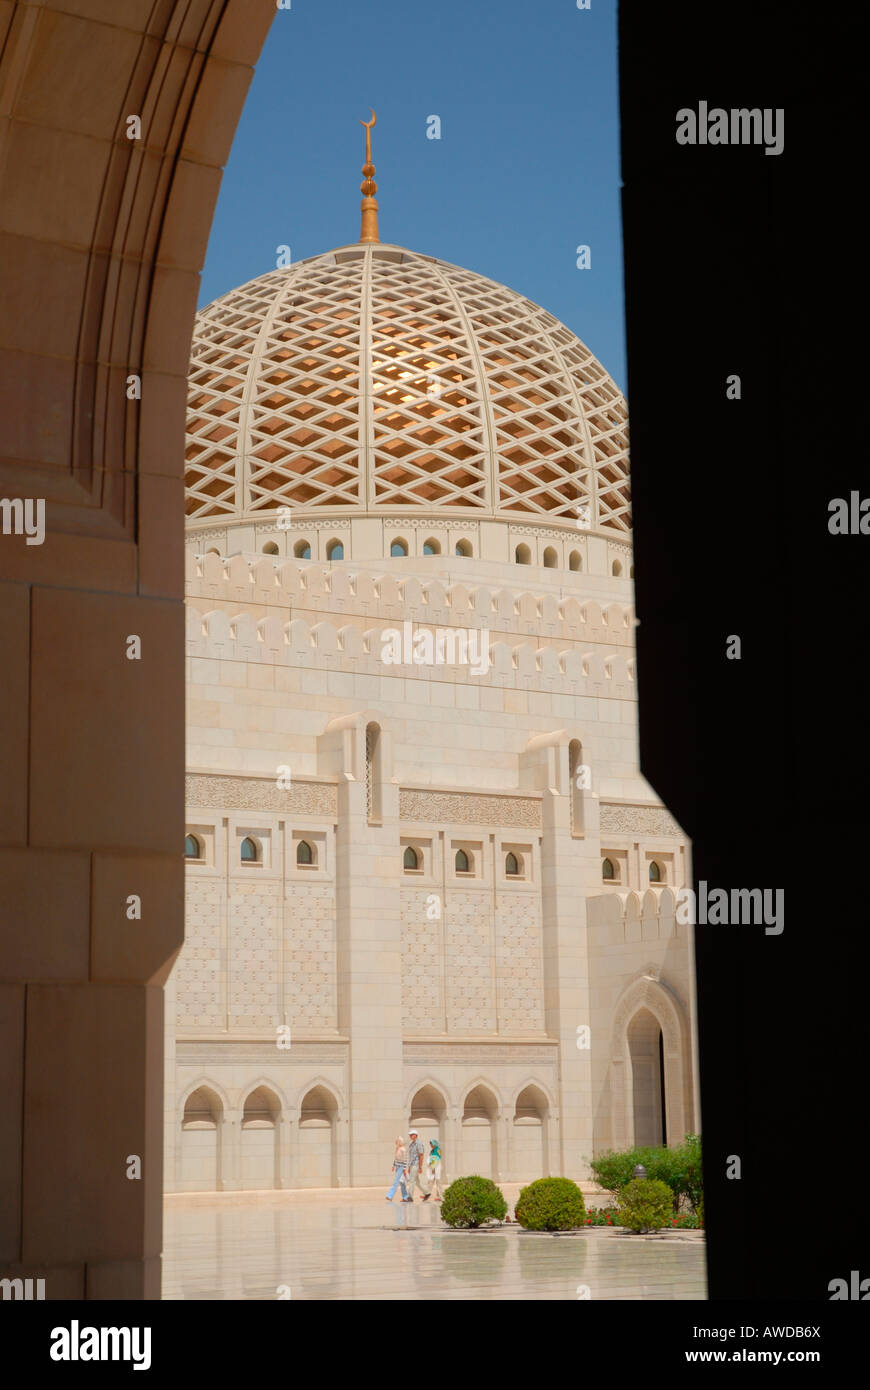 Sultan Kaboos mosque (Great Mosque), Muscat, Oman Stock Photo